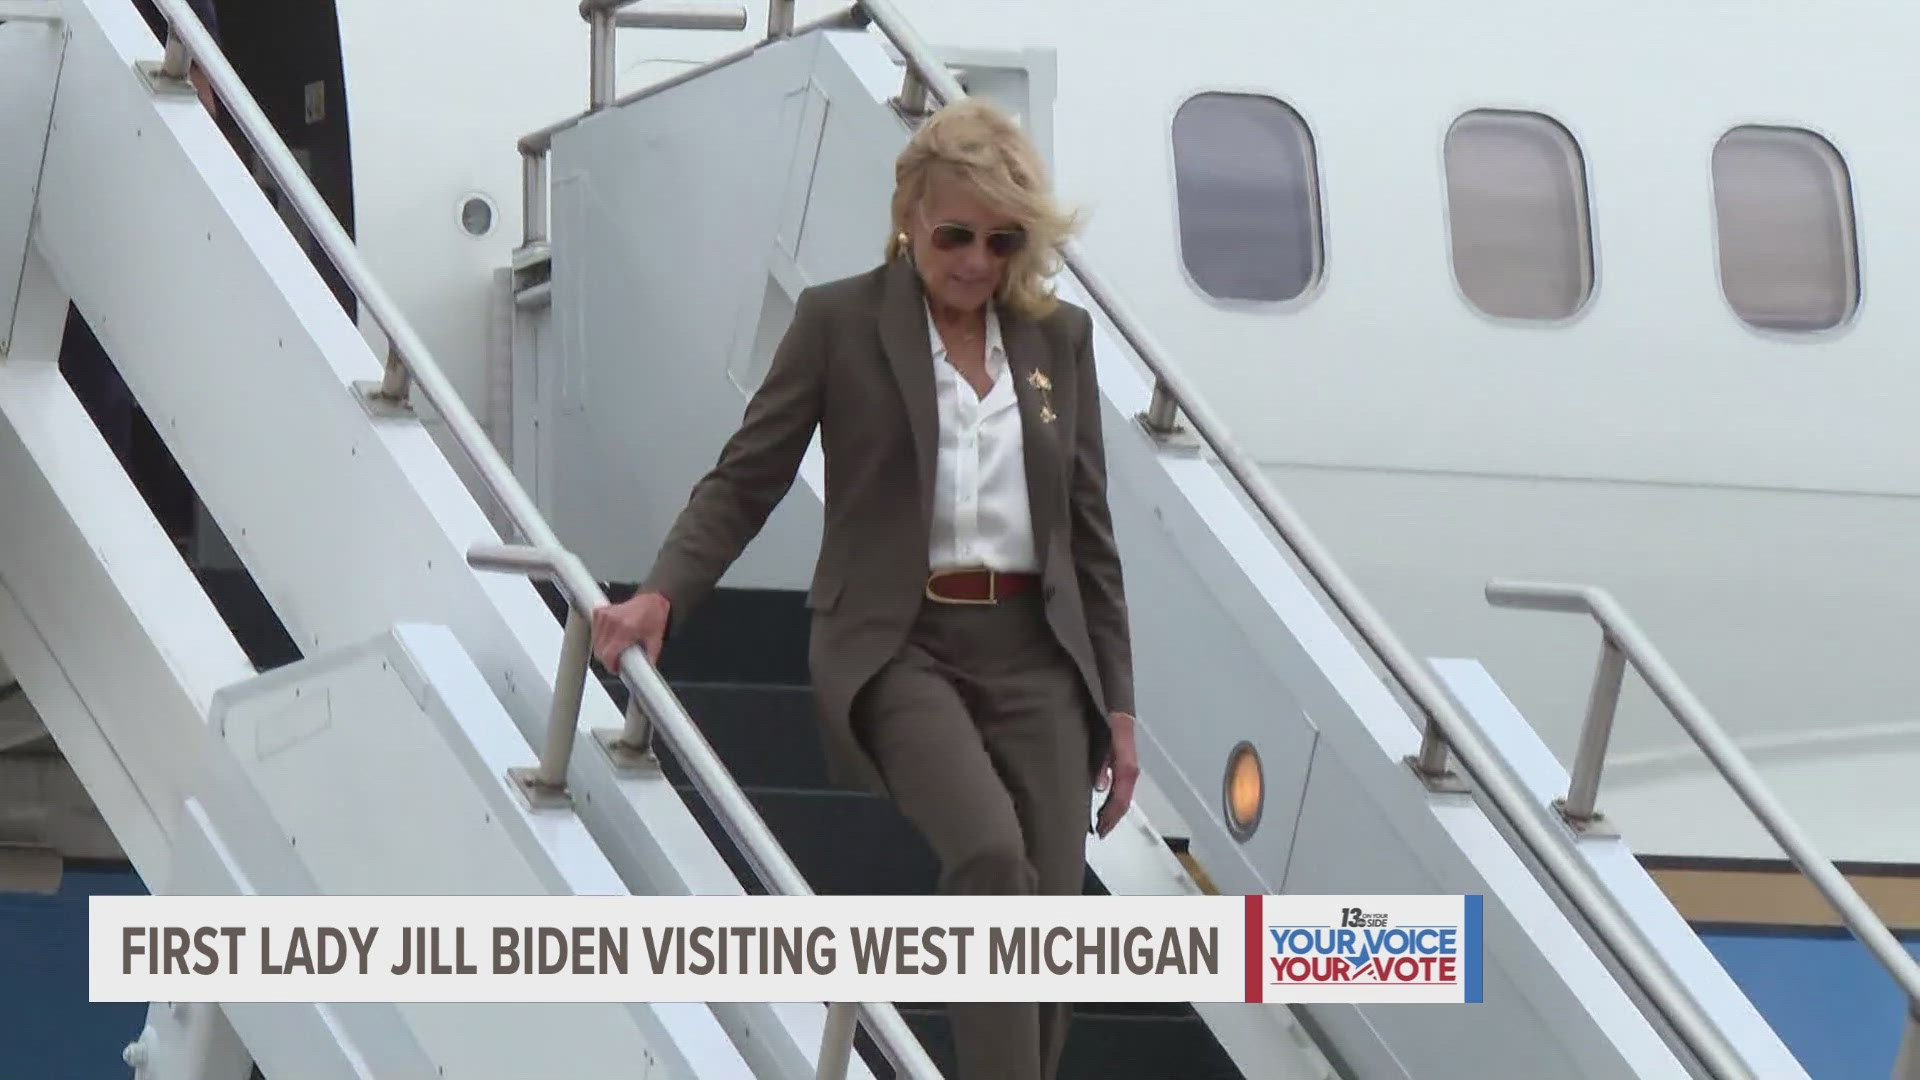 The First Lady landed at GRR early Tuesday evening.